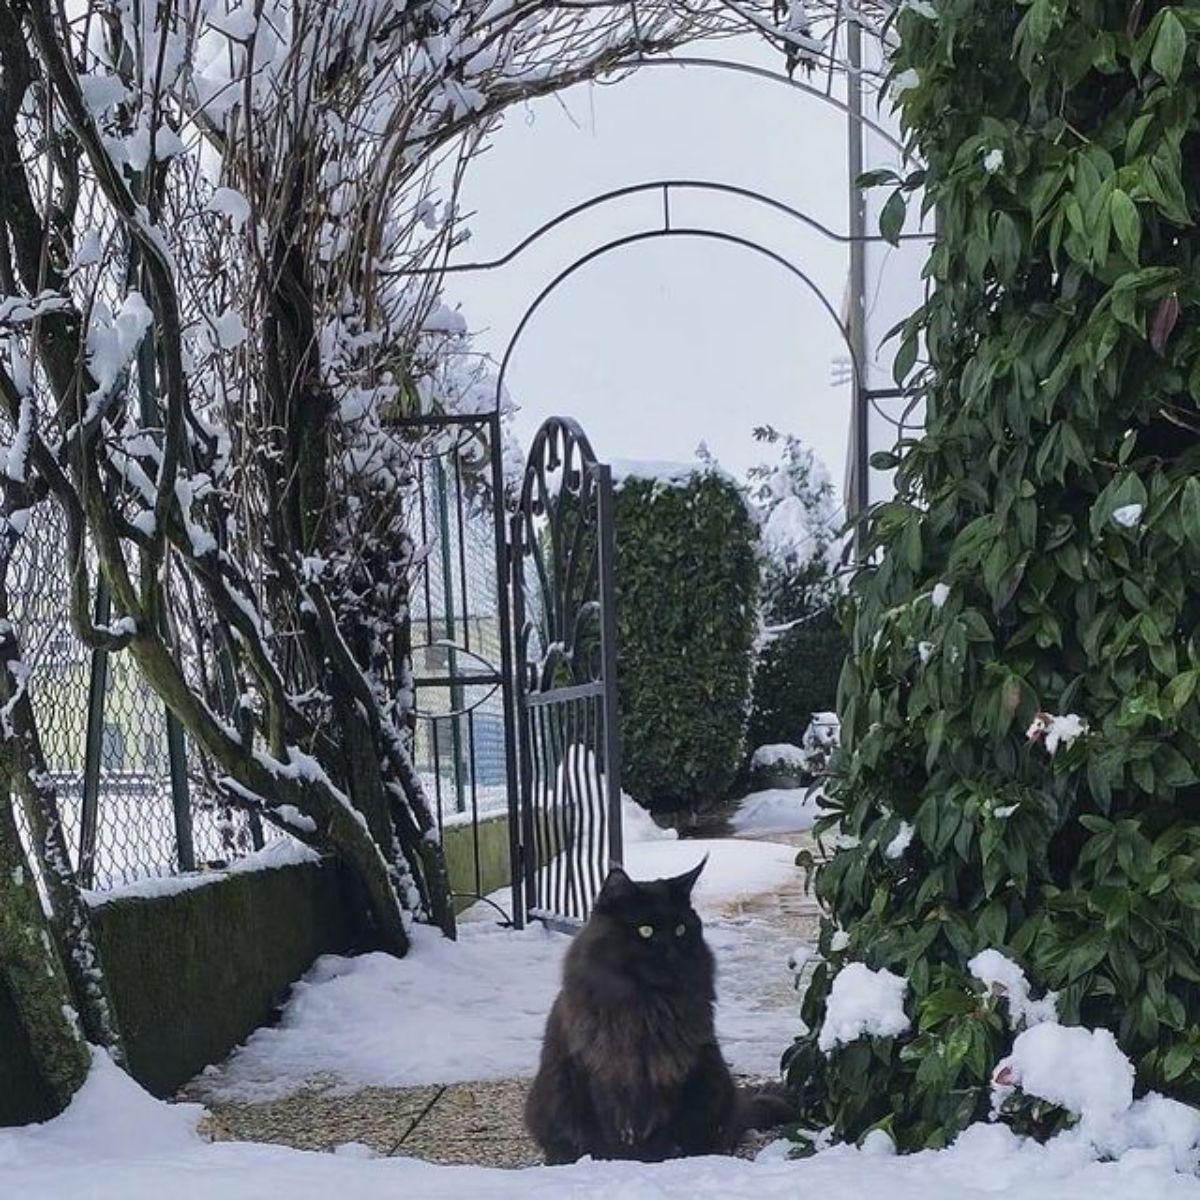 A black fluffy maine coon sitting on a pavement partially covered by snow.